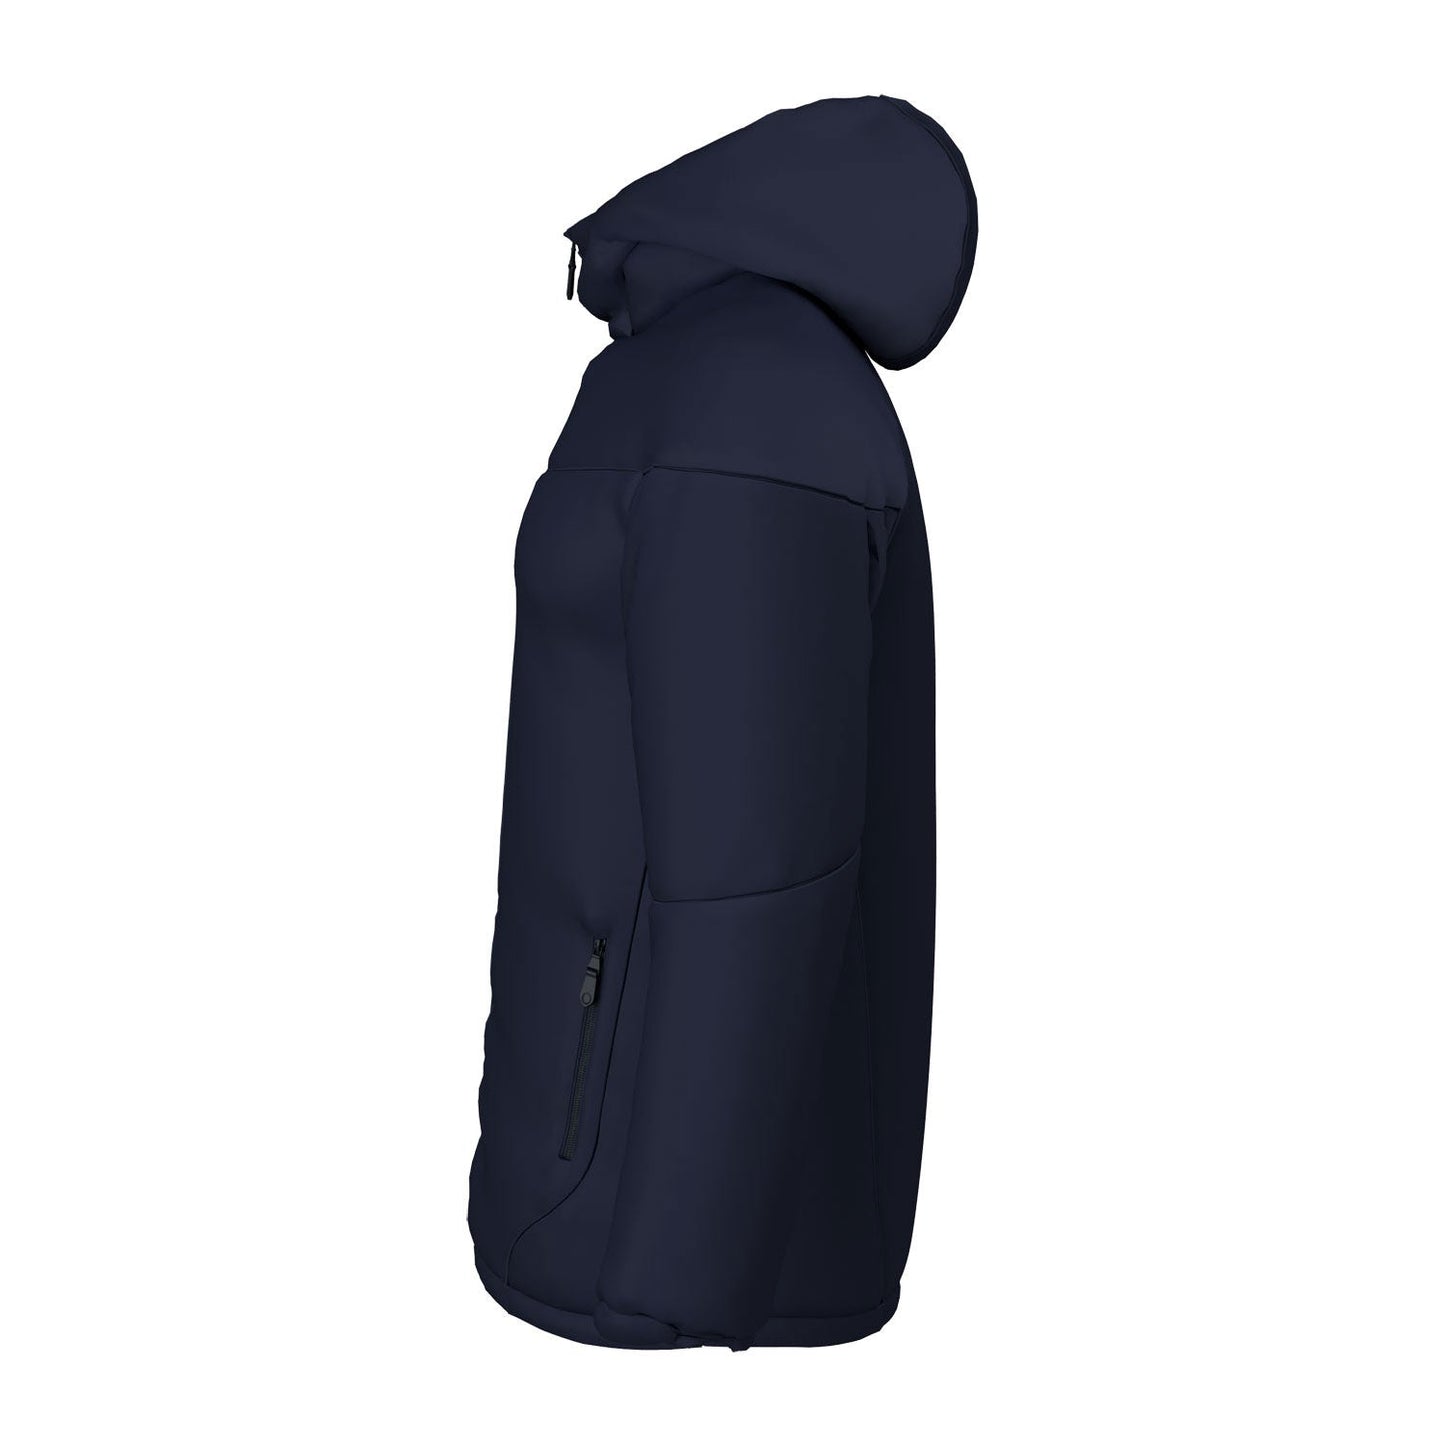 Rowing at Itchenor Contoured Thermal Jacket